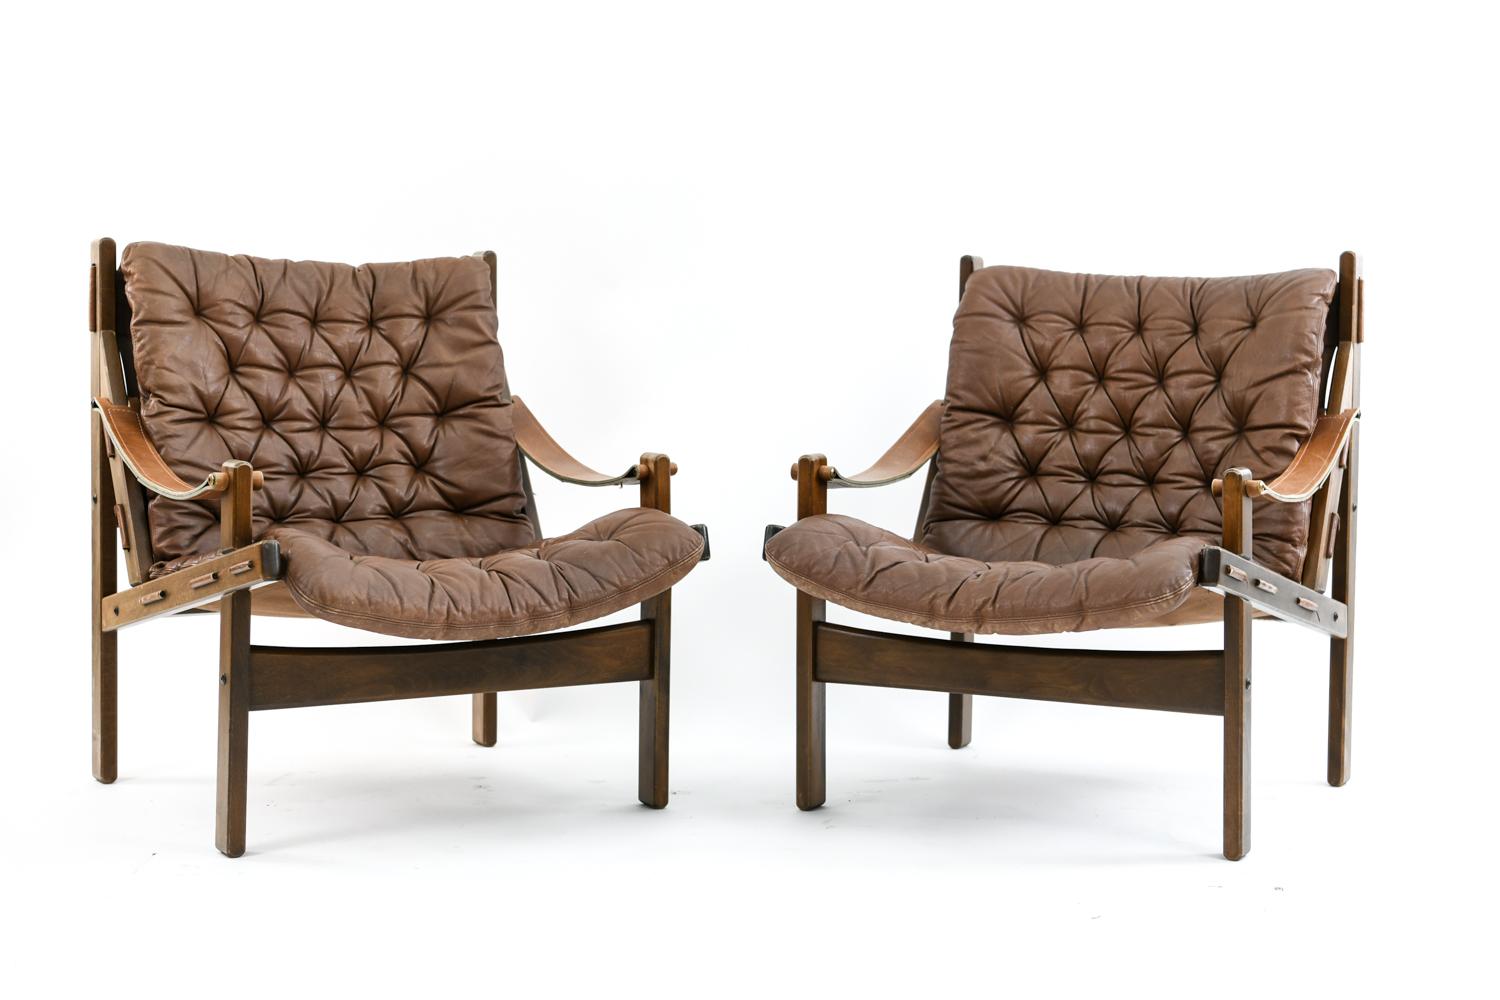 This is a fabulous pair of Norwegian midcentury lounge chairs designed by Torbjørn Afdal for Bruksbo. These 